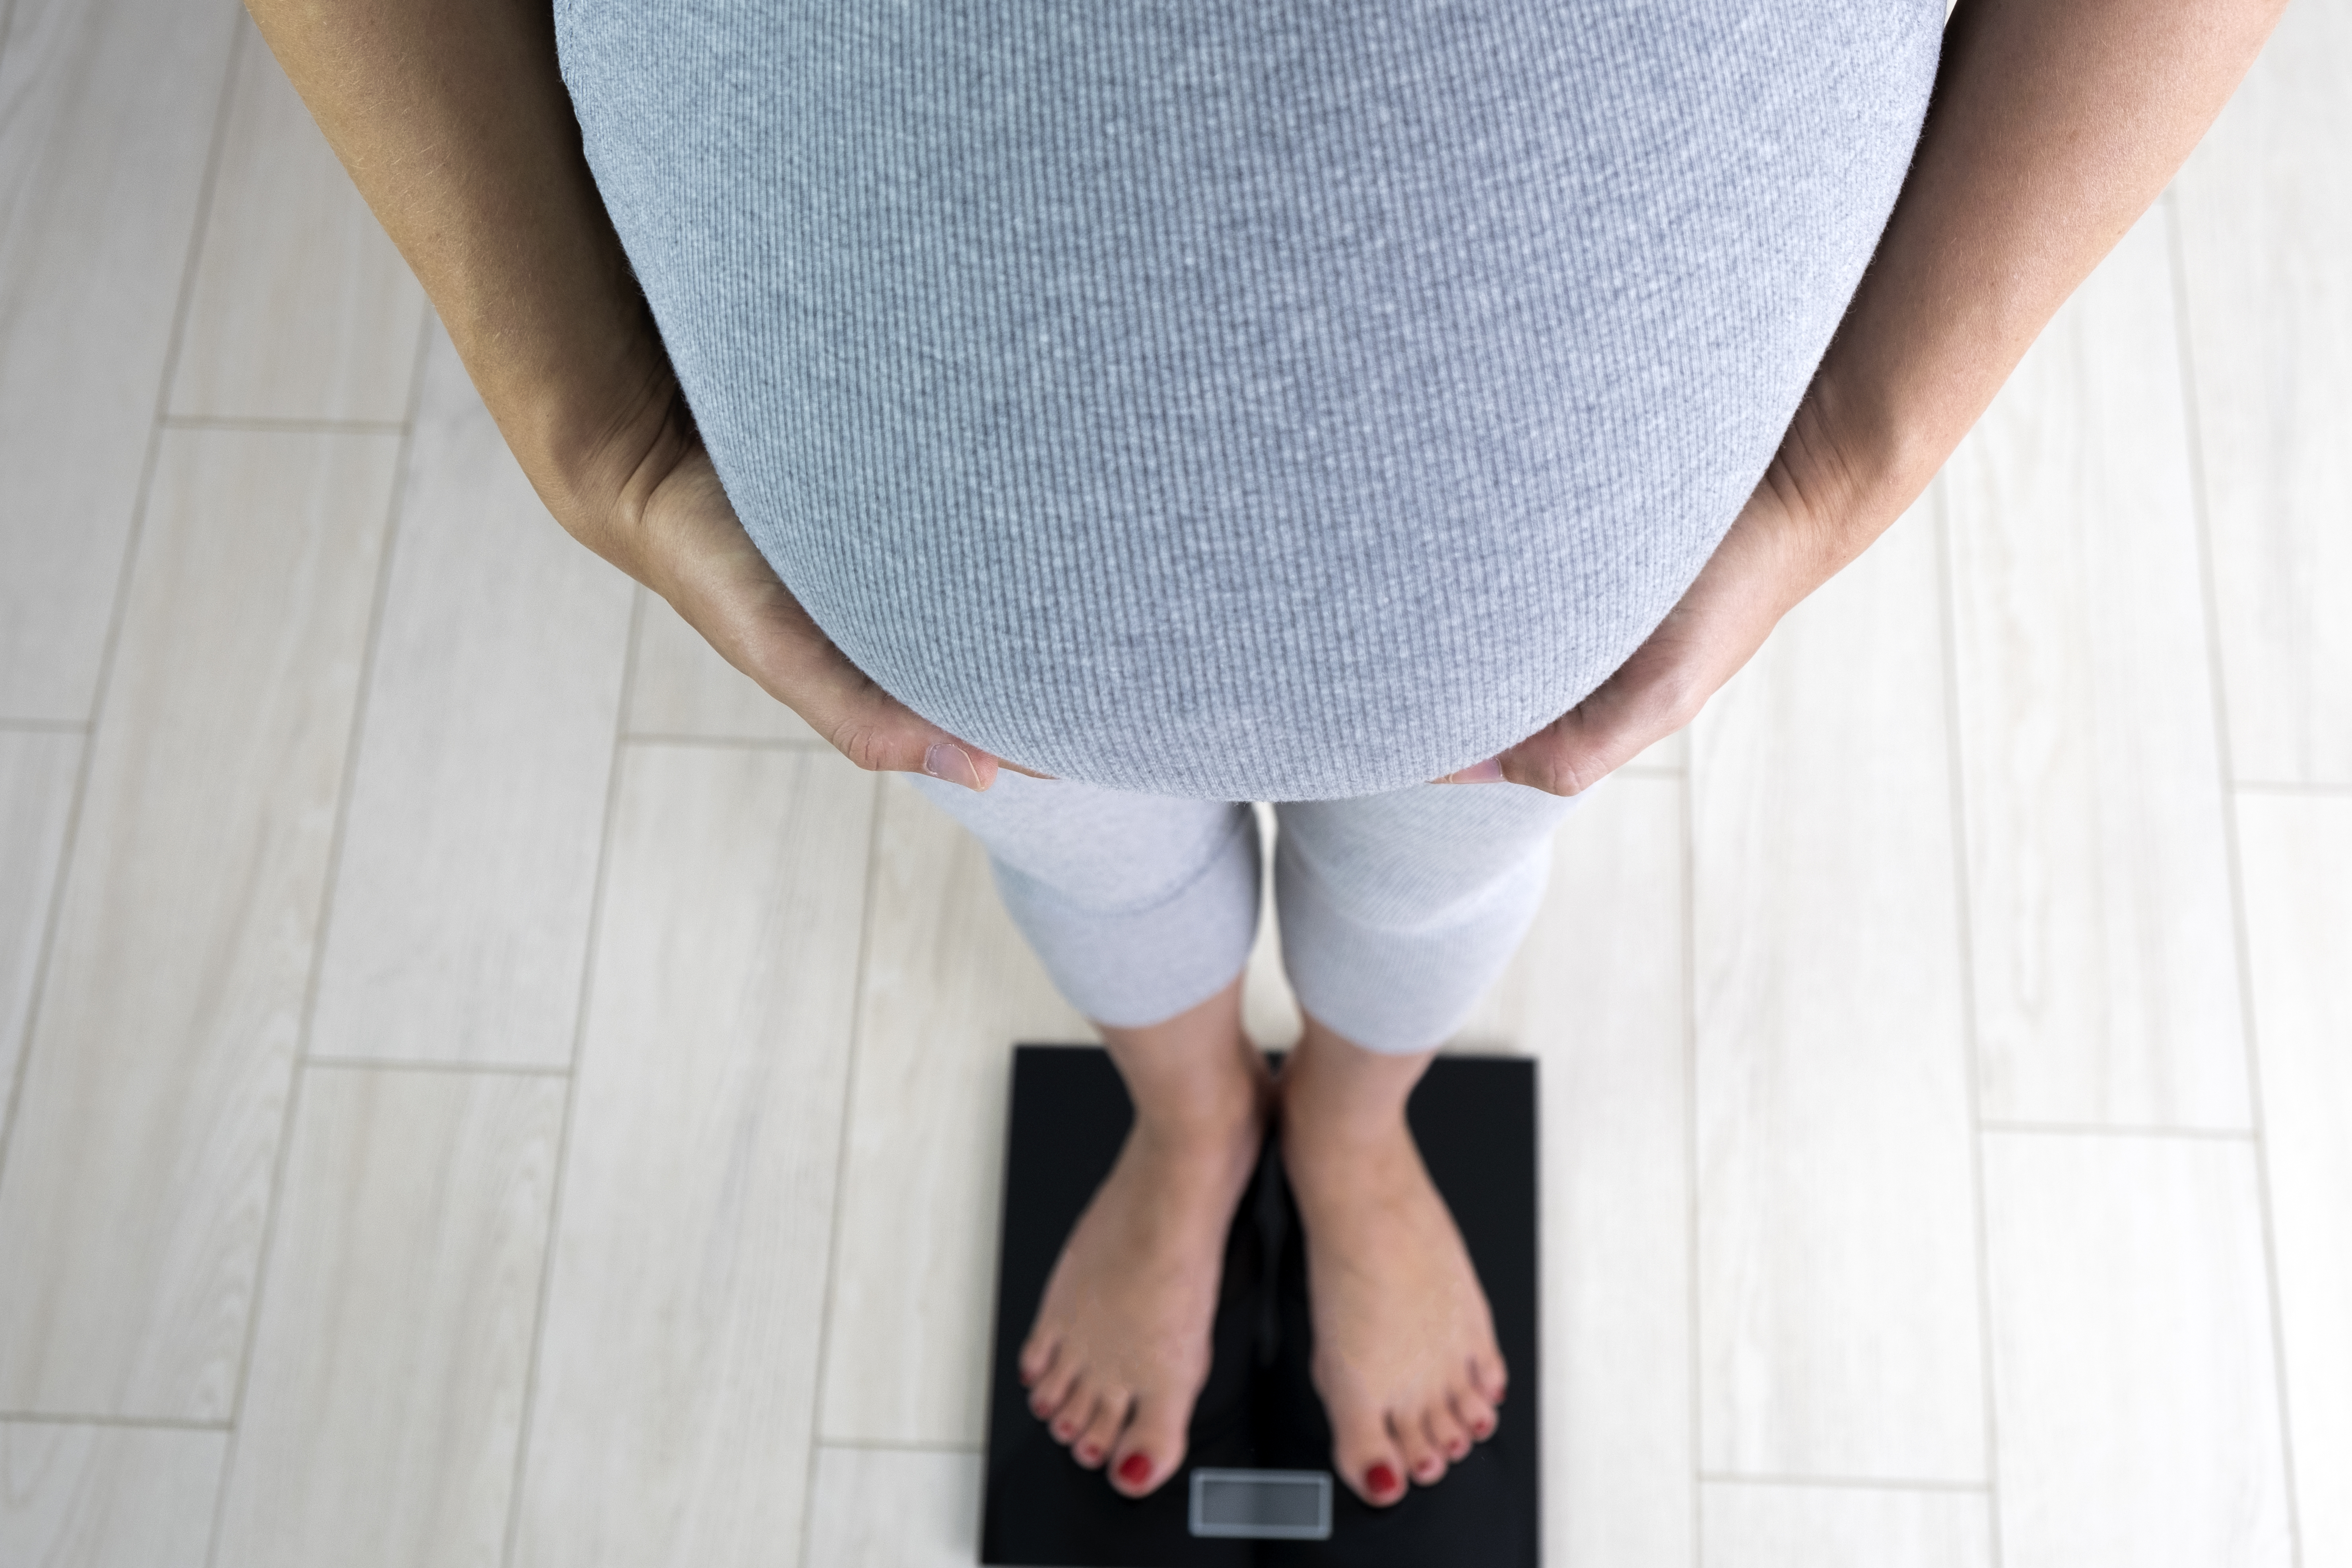 Mothers with obesity at greater risk of stillbirth: Canadian study